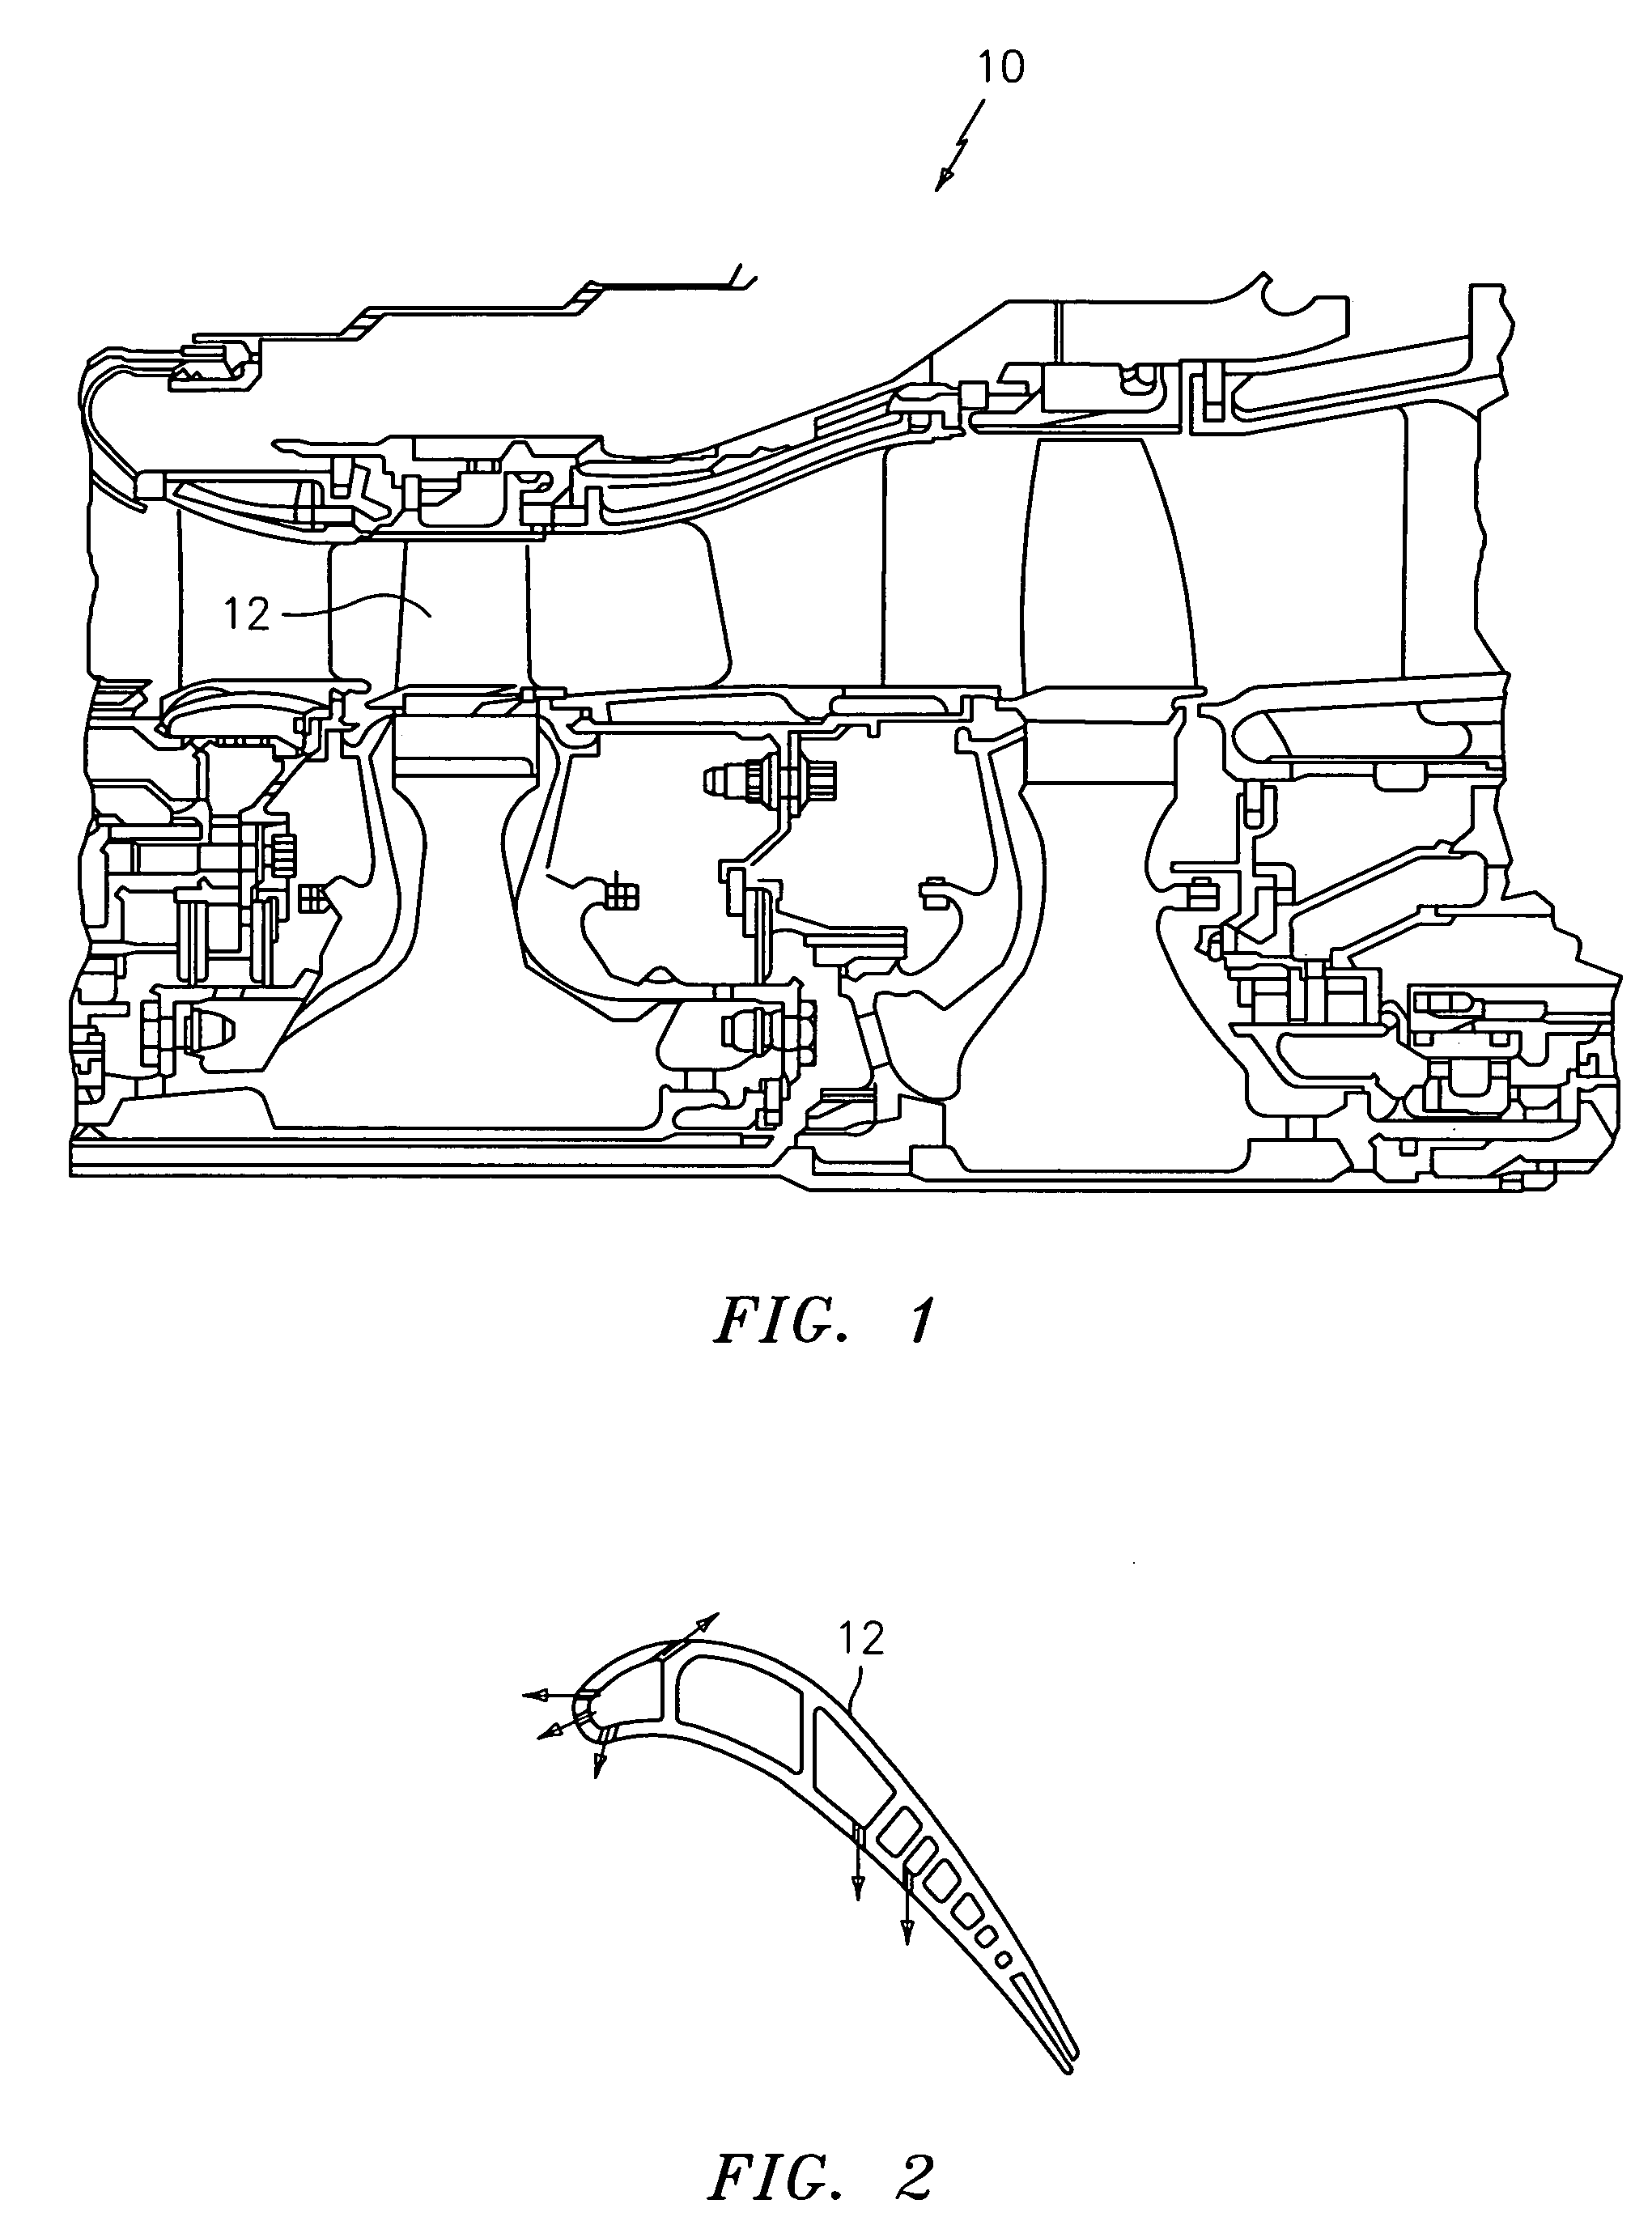 Integrated platform, tip, and main body microcircuits for turbine blades